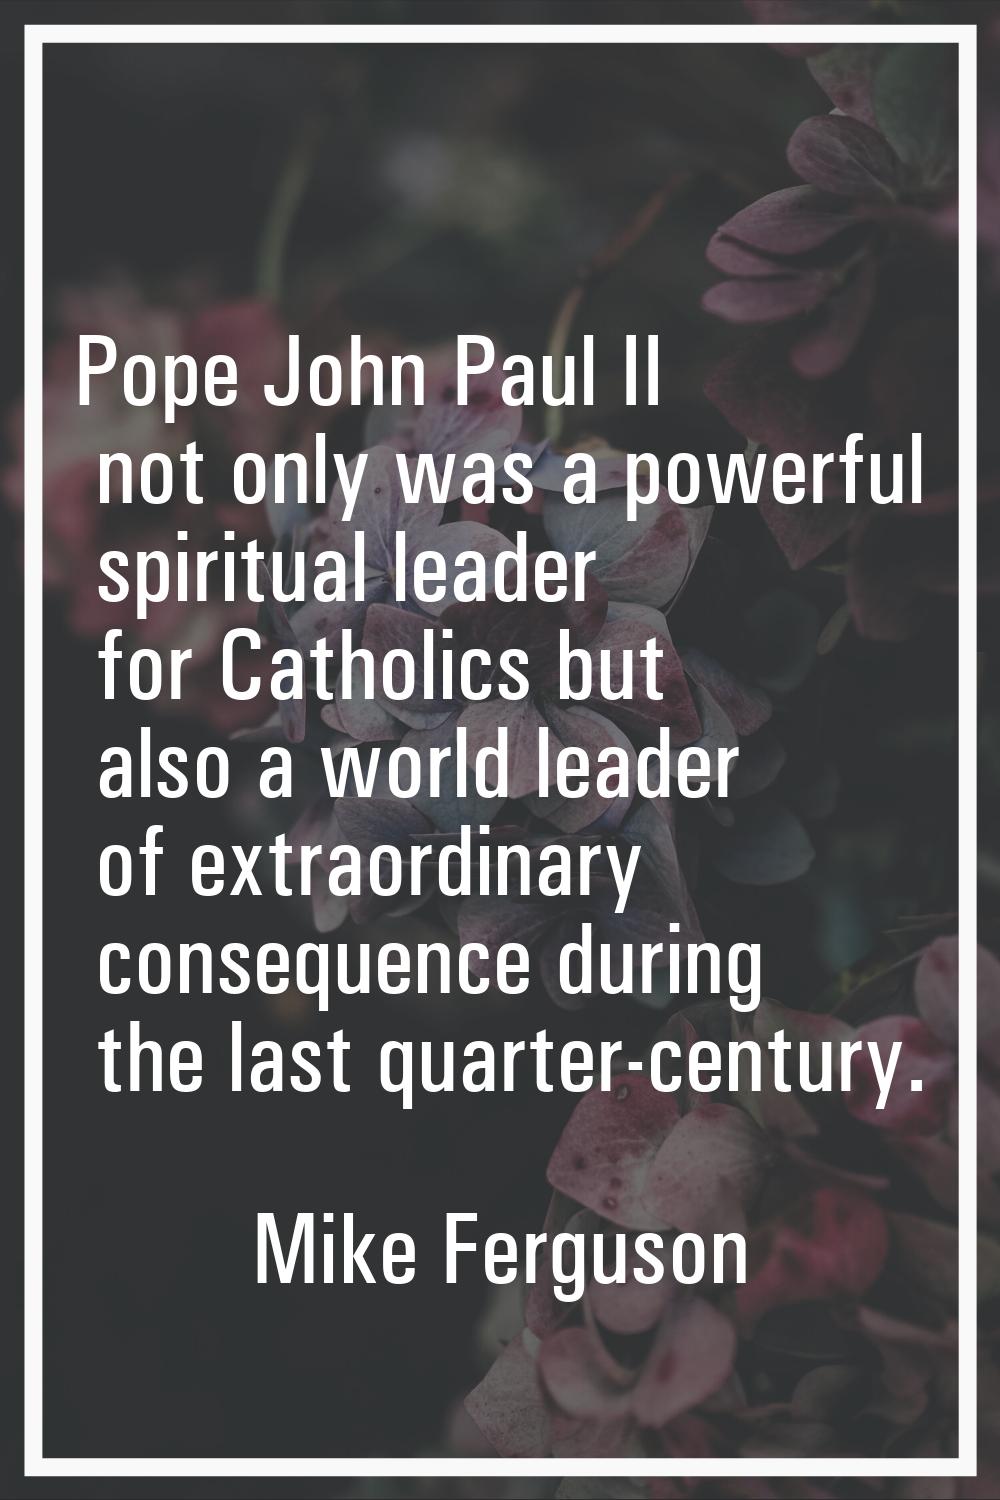 Pope John Paul II not only was a powerful spiritual leader for Catholics but also a world leader of